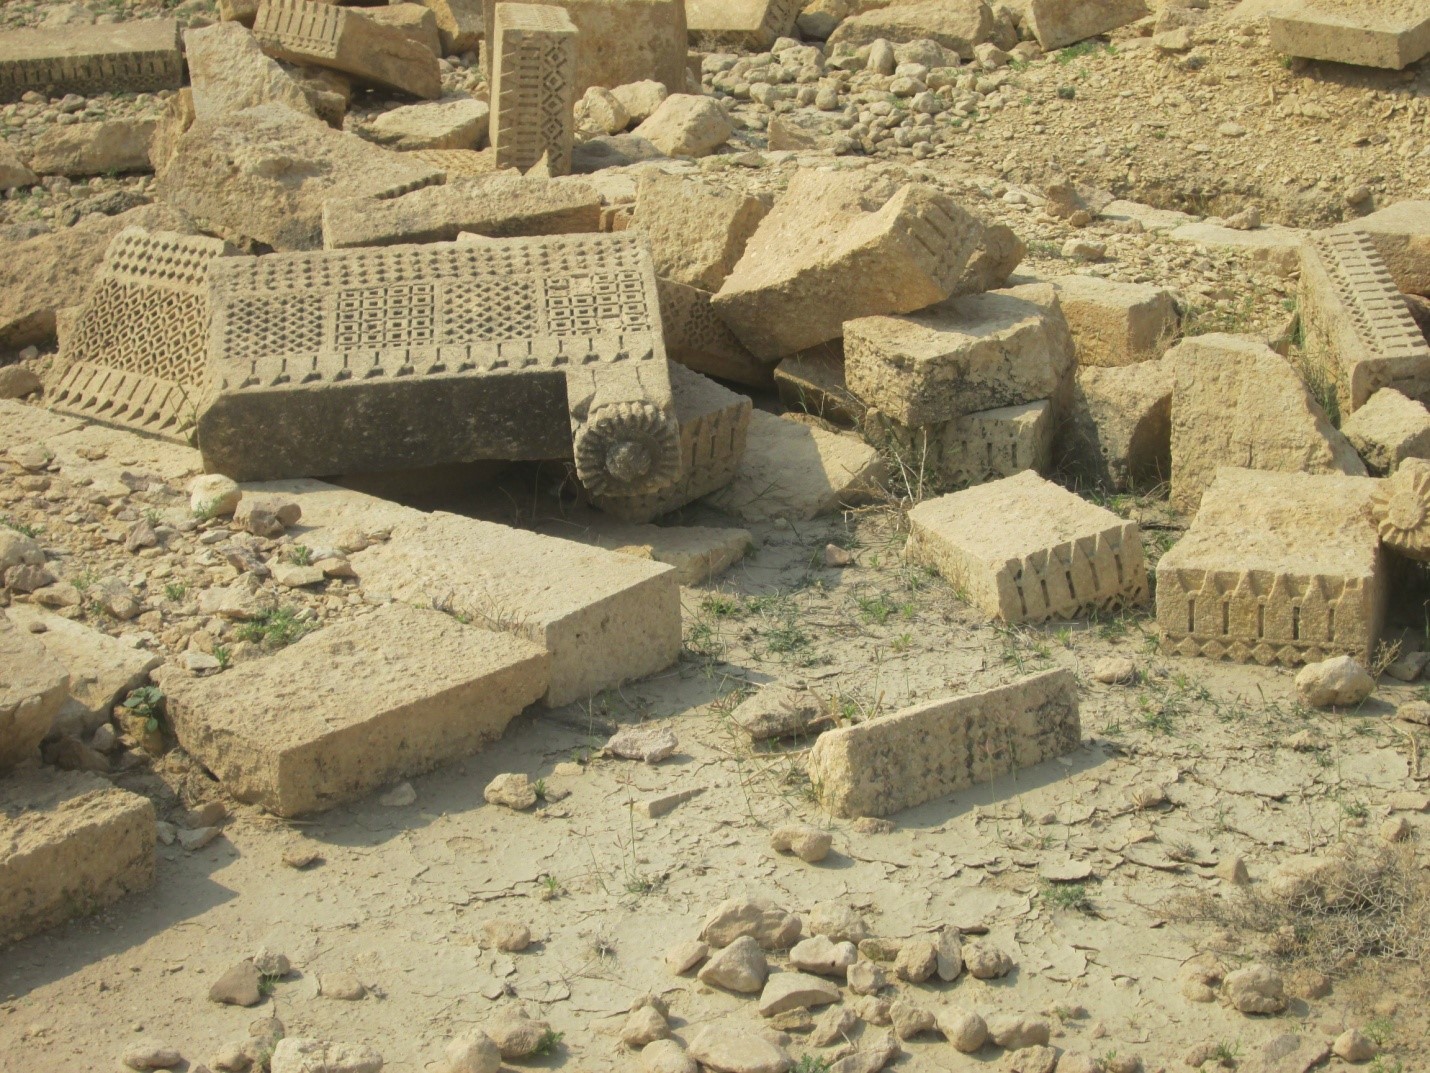 07 Carved stone slabs scattered on surface with rosette and square Motifs - Sindh Courier